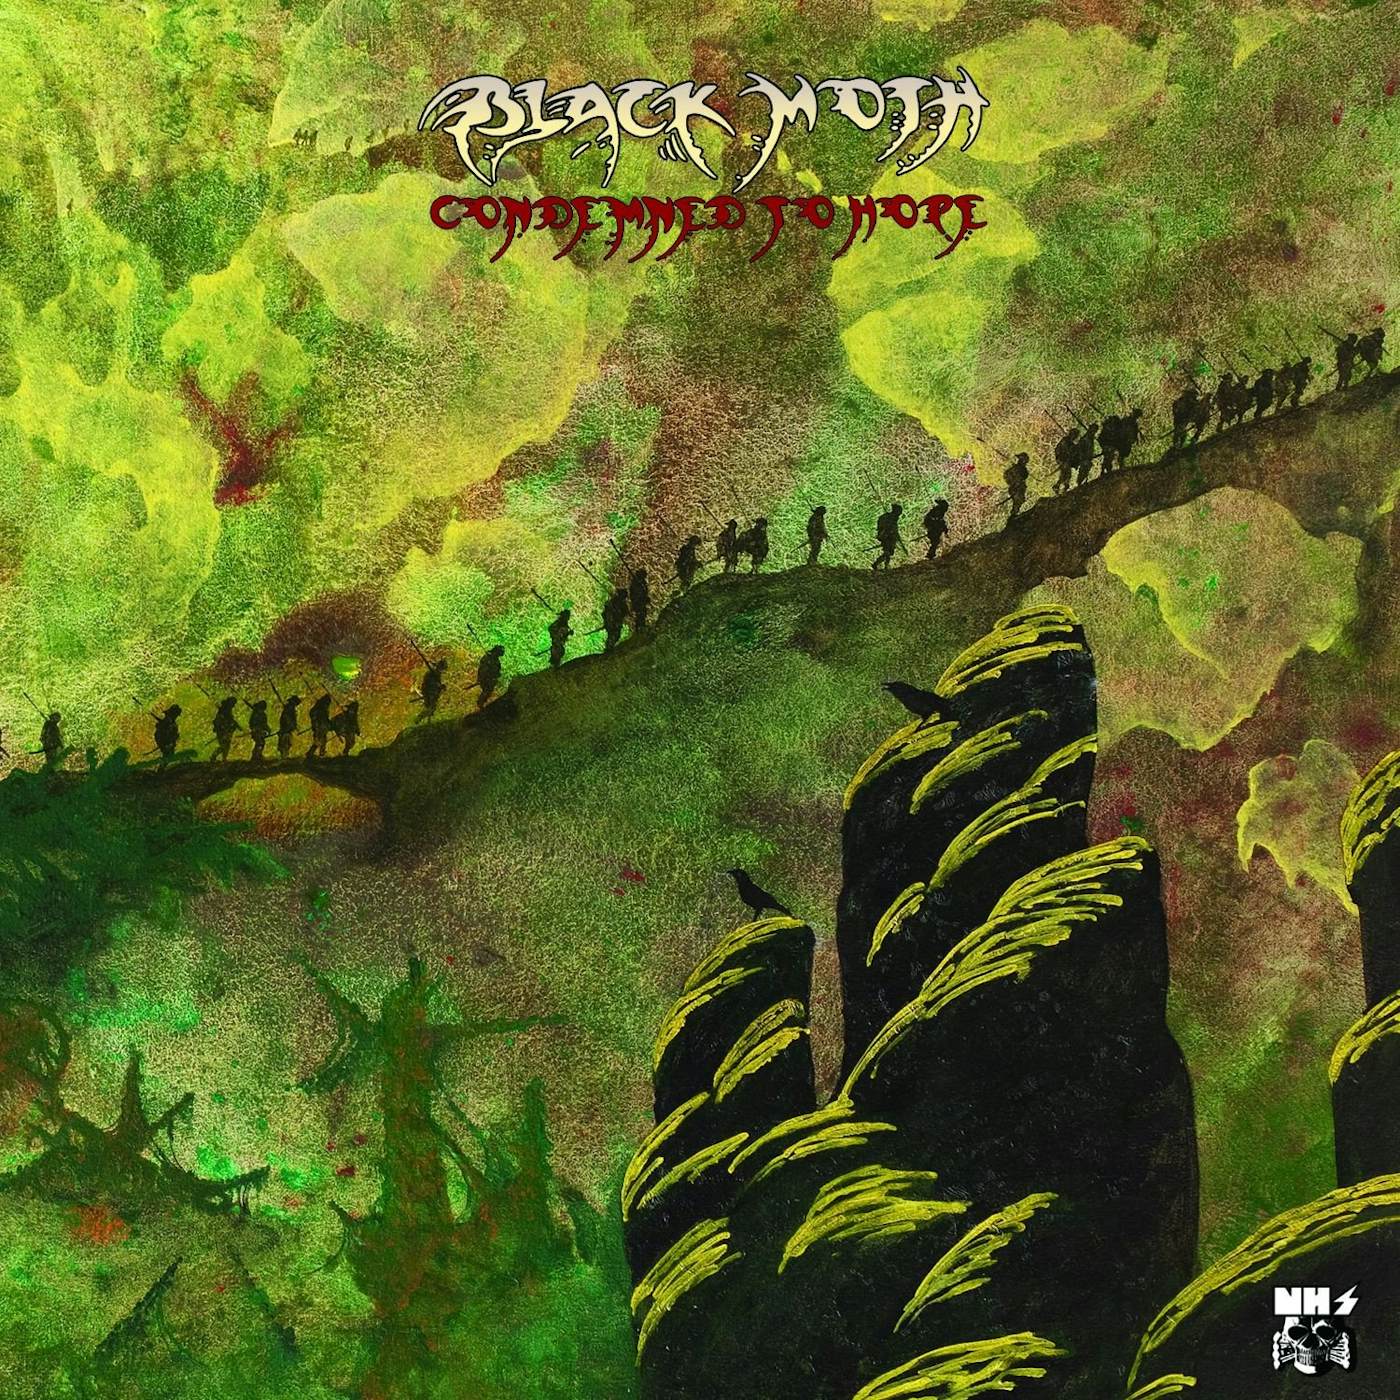 Black Moth 'Condemned to Hope' Vinyl Record